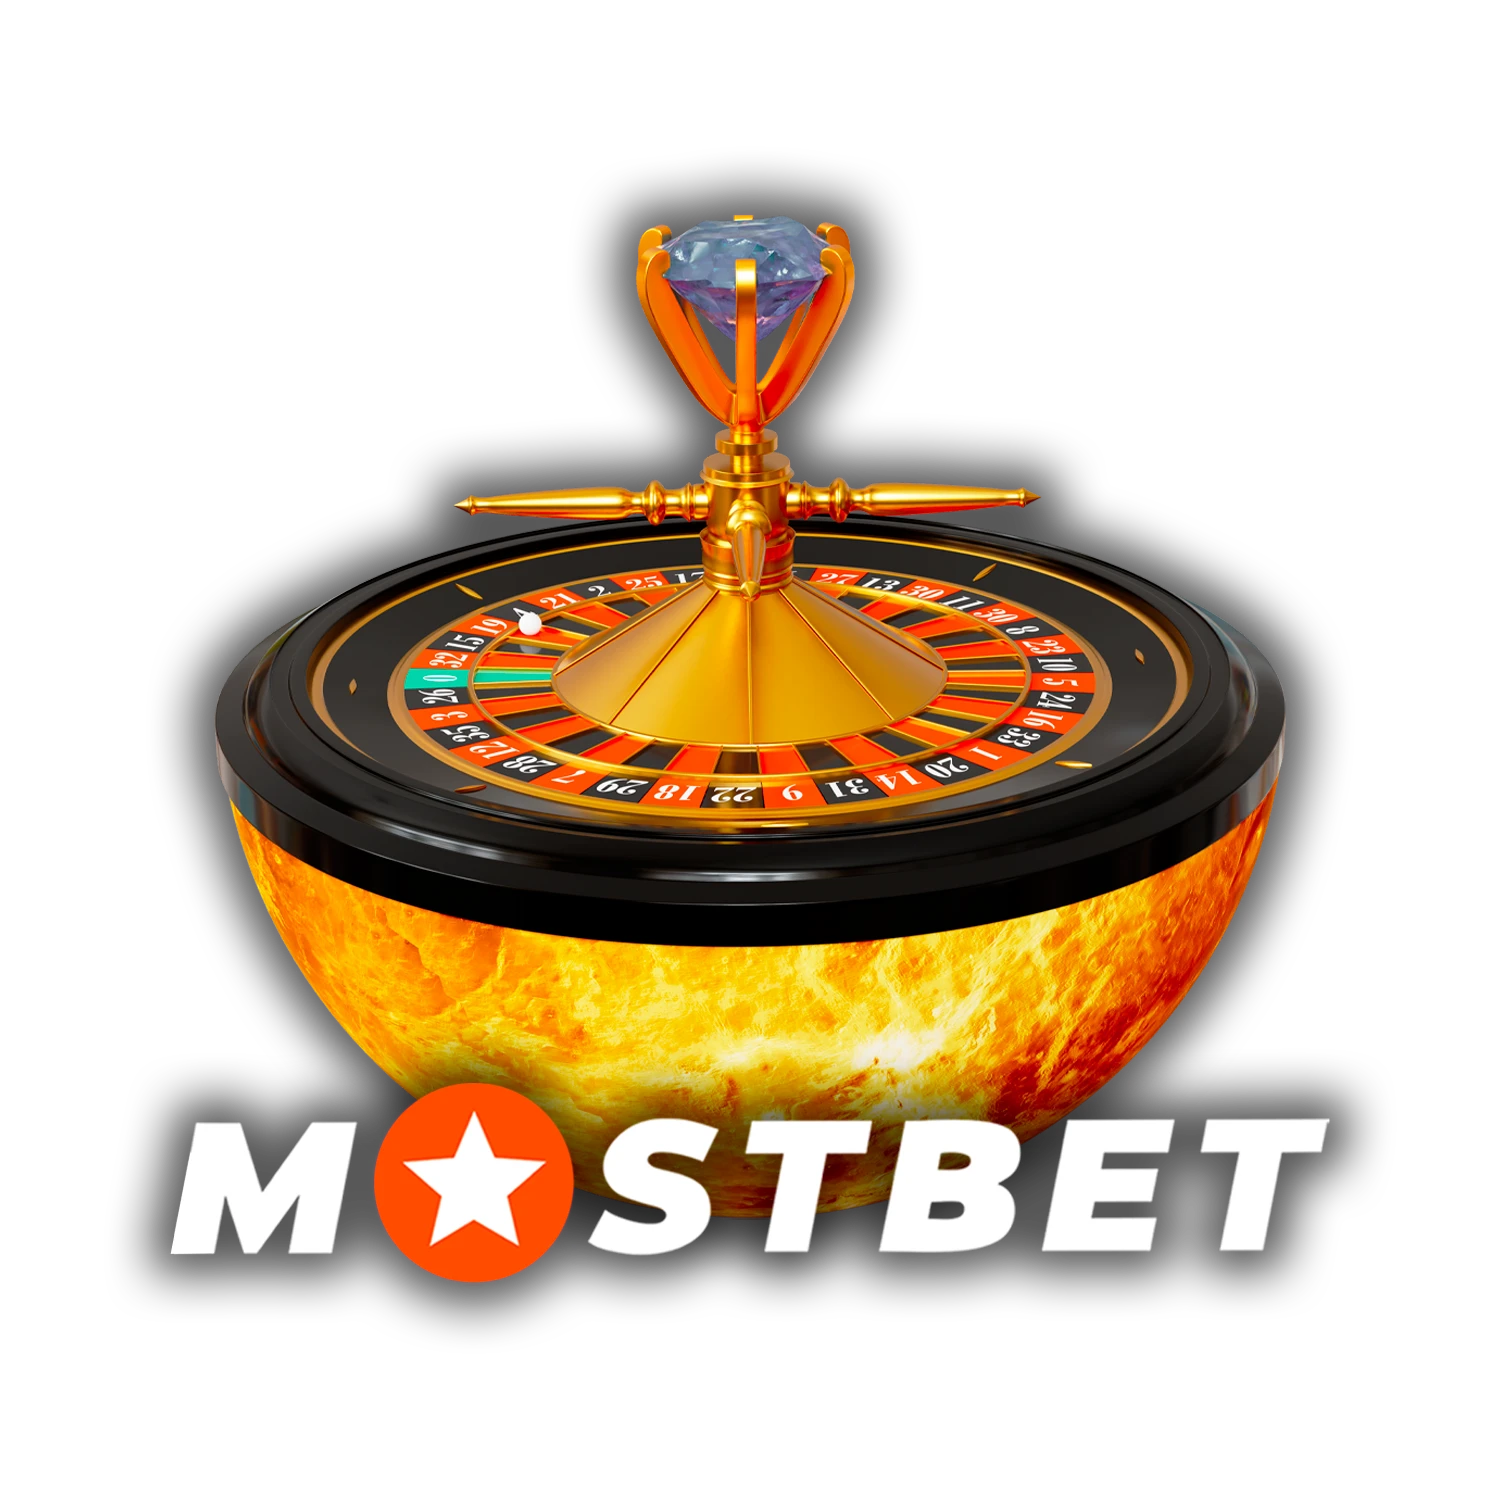 Learn how to play casino games at Mostbet.